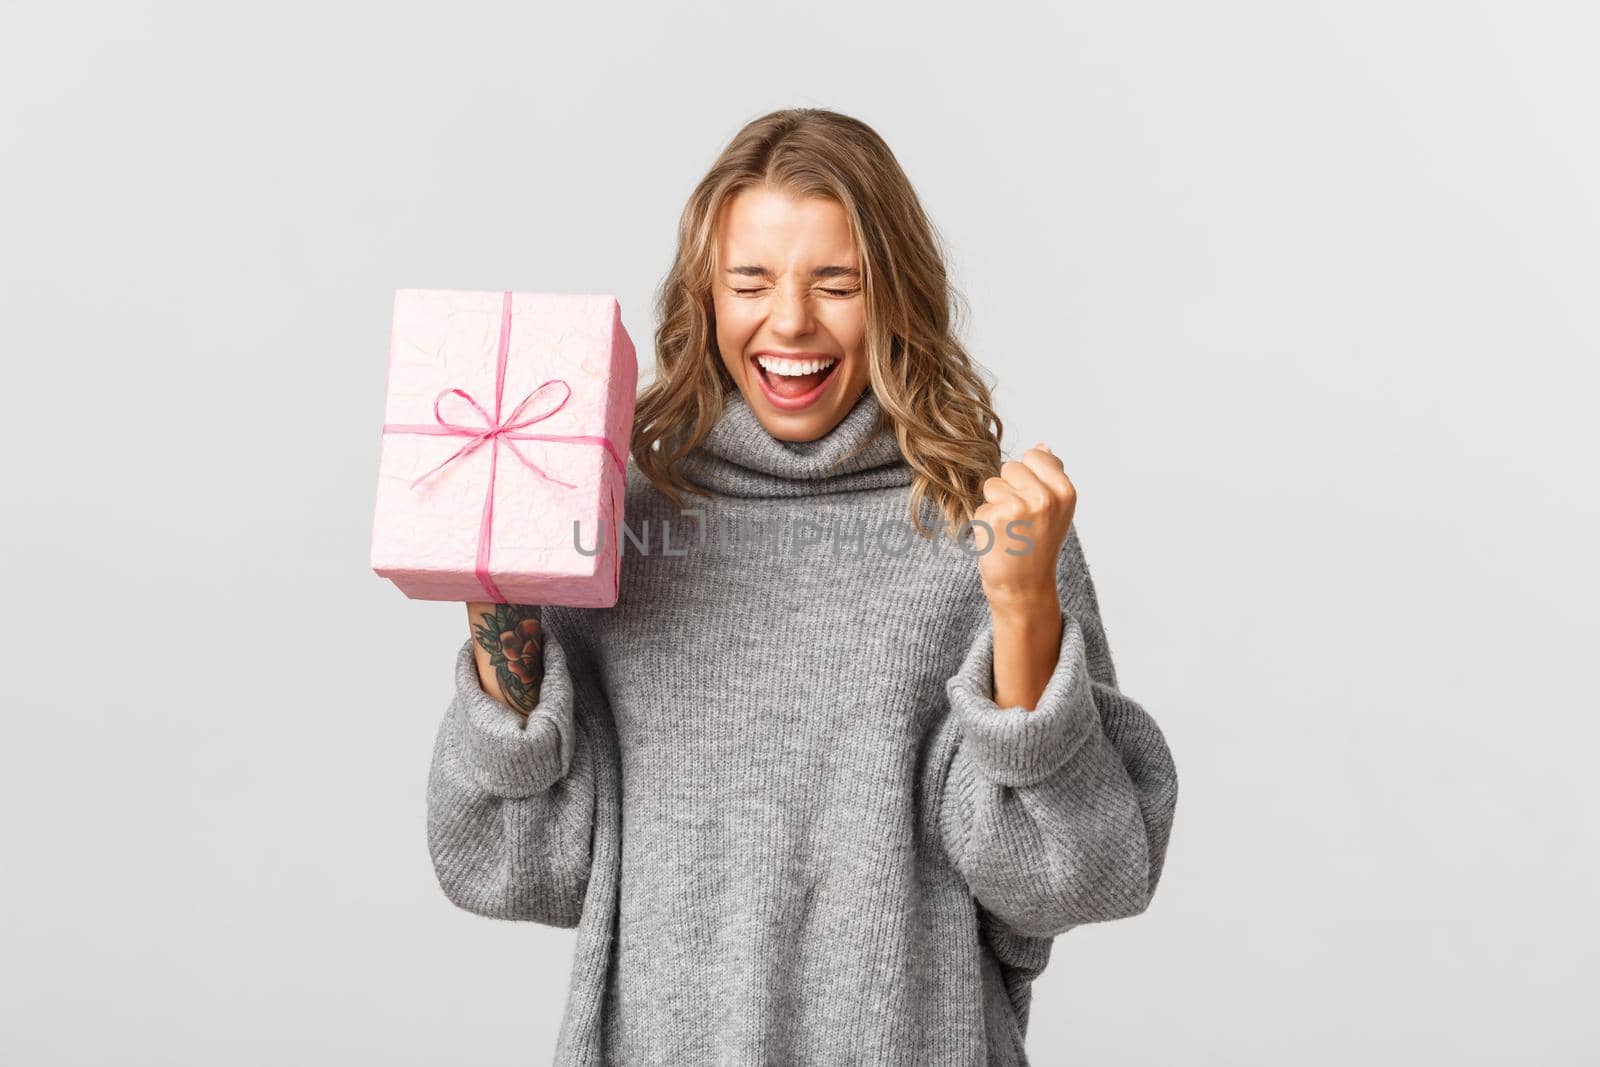 Cheerful pretty girl in grey sweater, looking happy, celebrating her birthday and receiving gift, standing over white background.